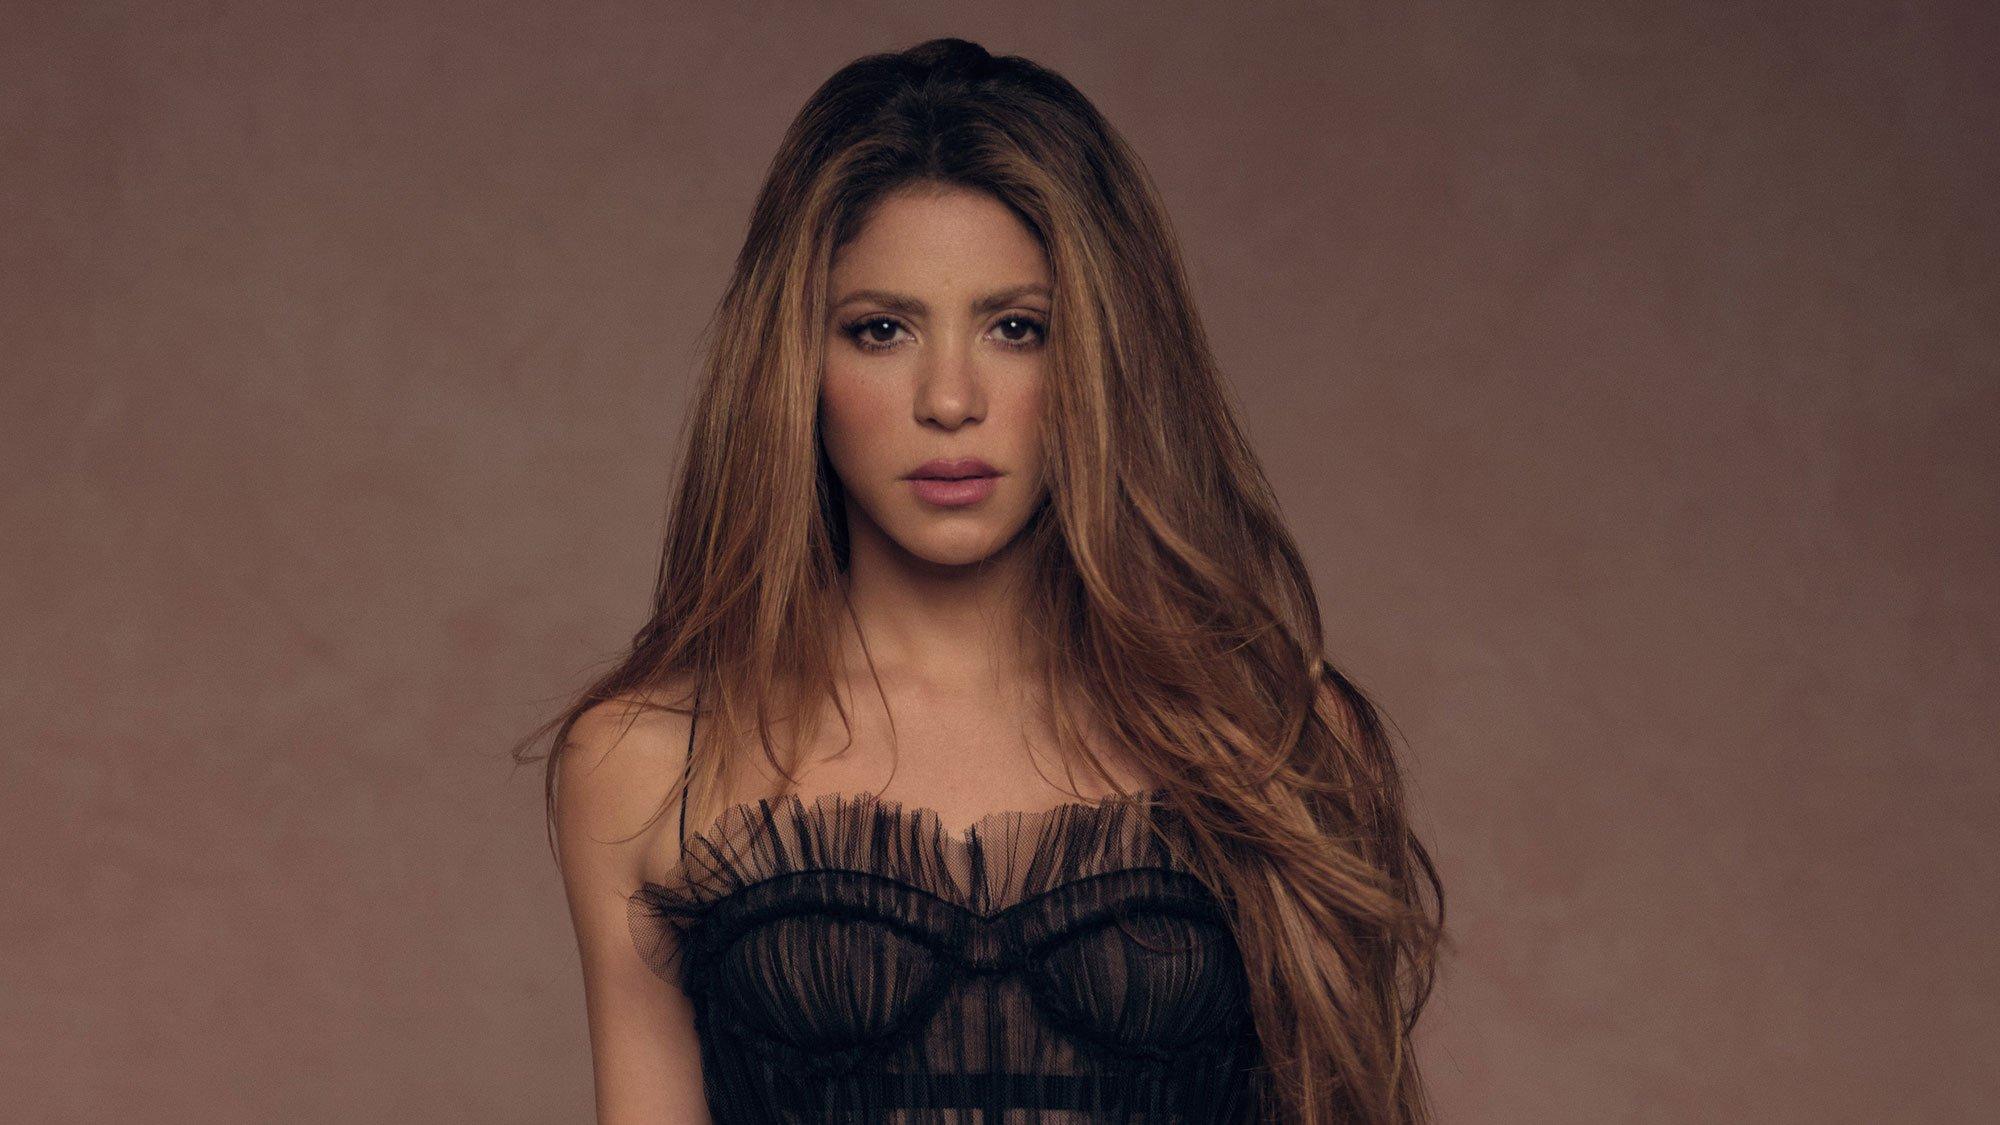 Lyrics to Shakira's new song, 'El Jefe': The same as always, the same  routine